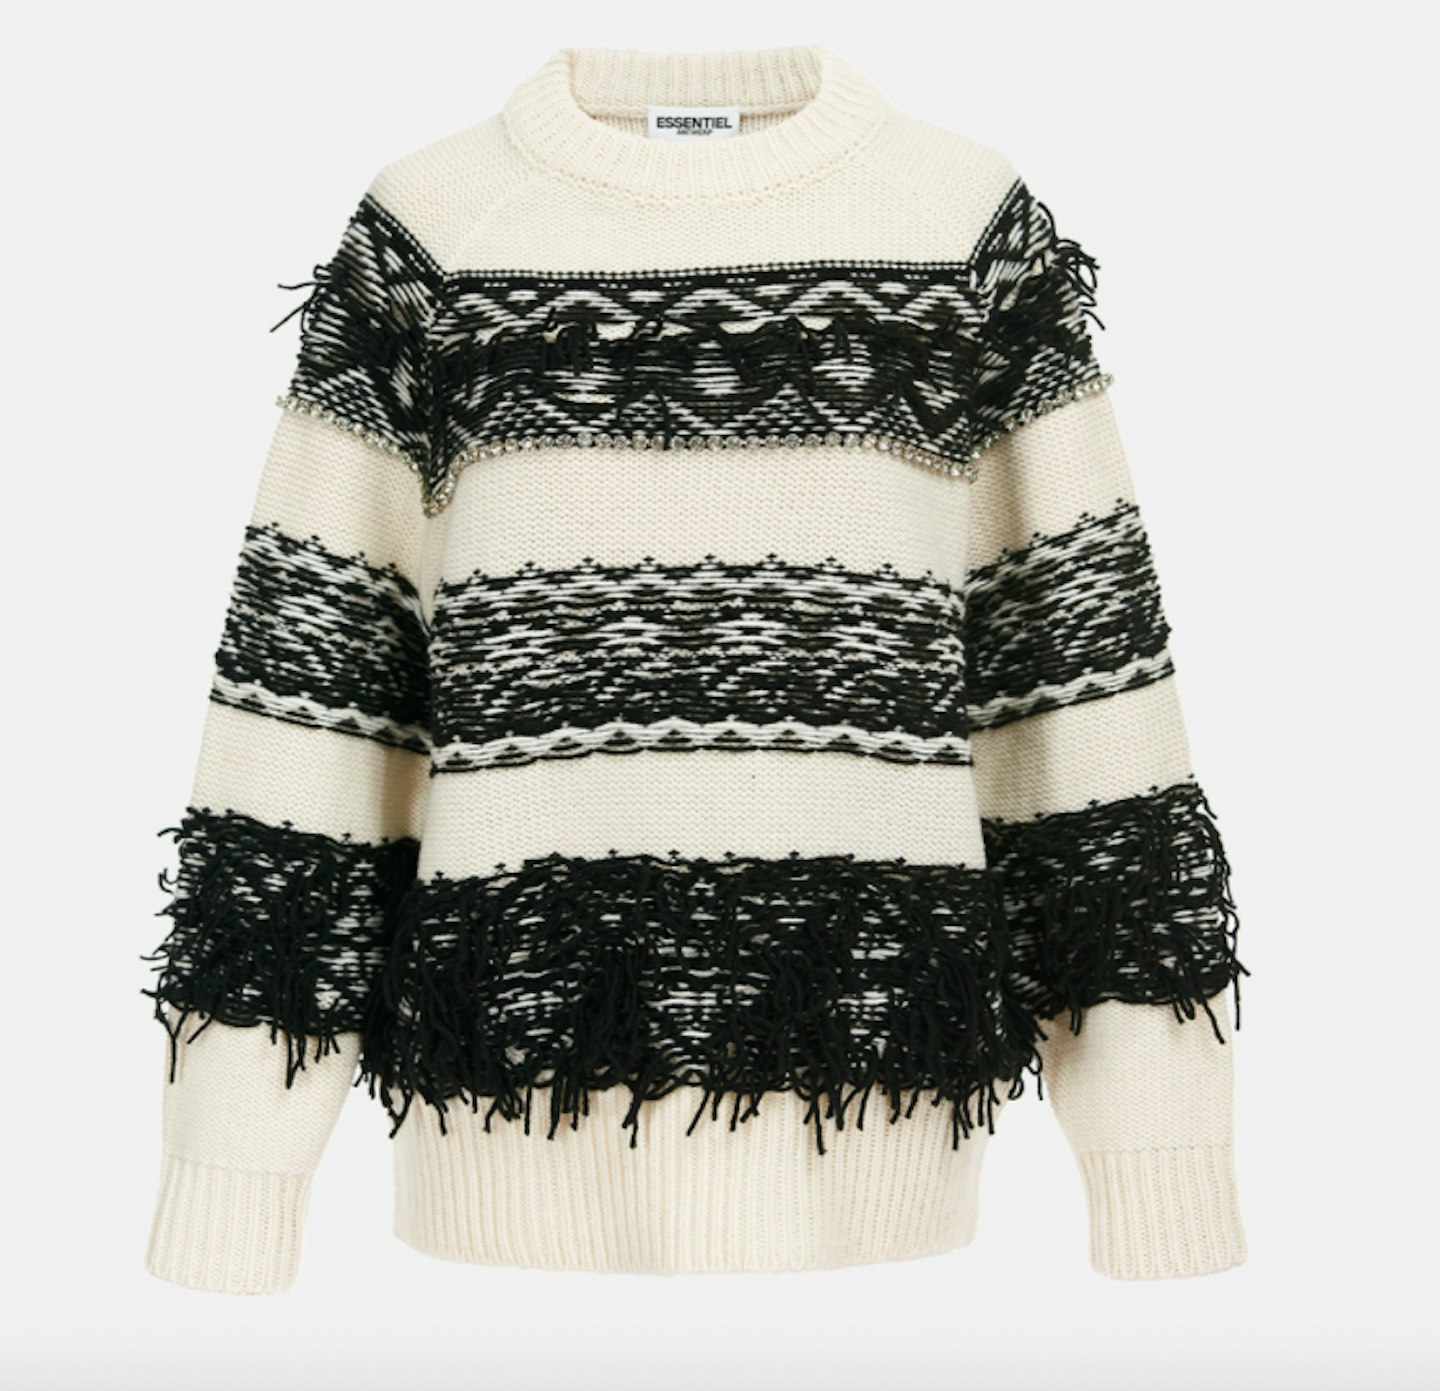 Essentiel Antwerp, Black And White Inside-Out Sweater, WAS £240 NOW £192